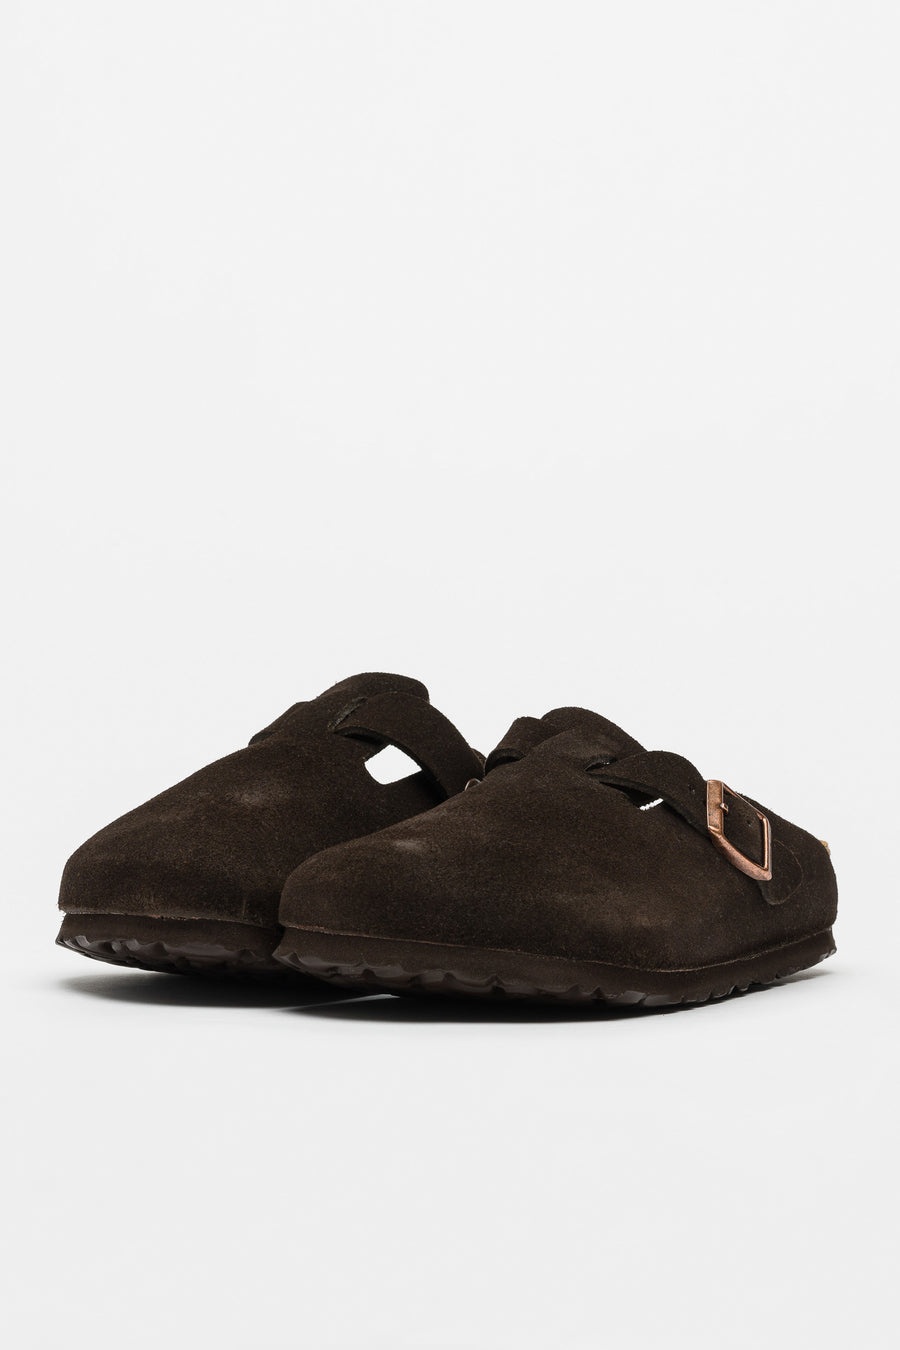 Boston Soft Footbed Suede/Leather Mule in Mocha - 2